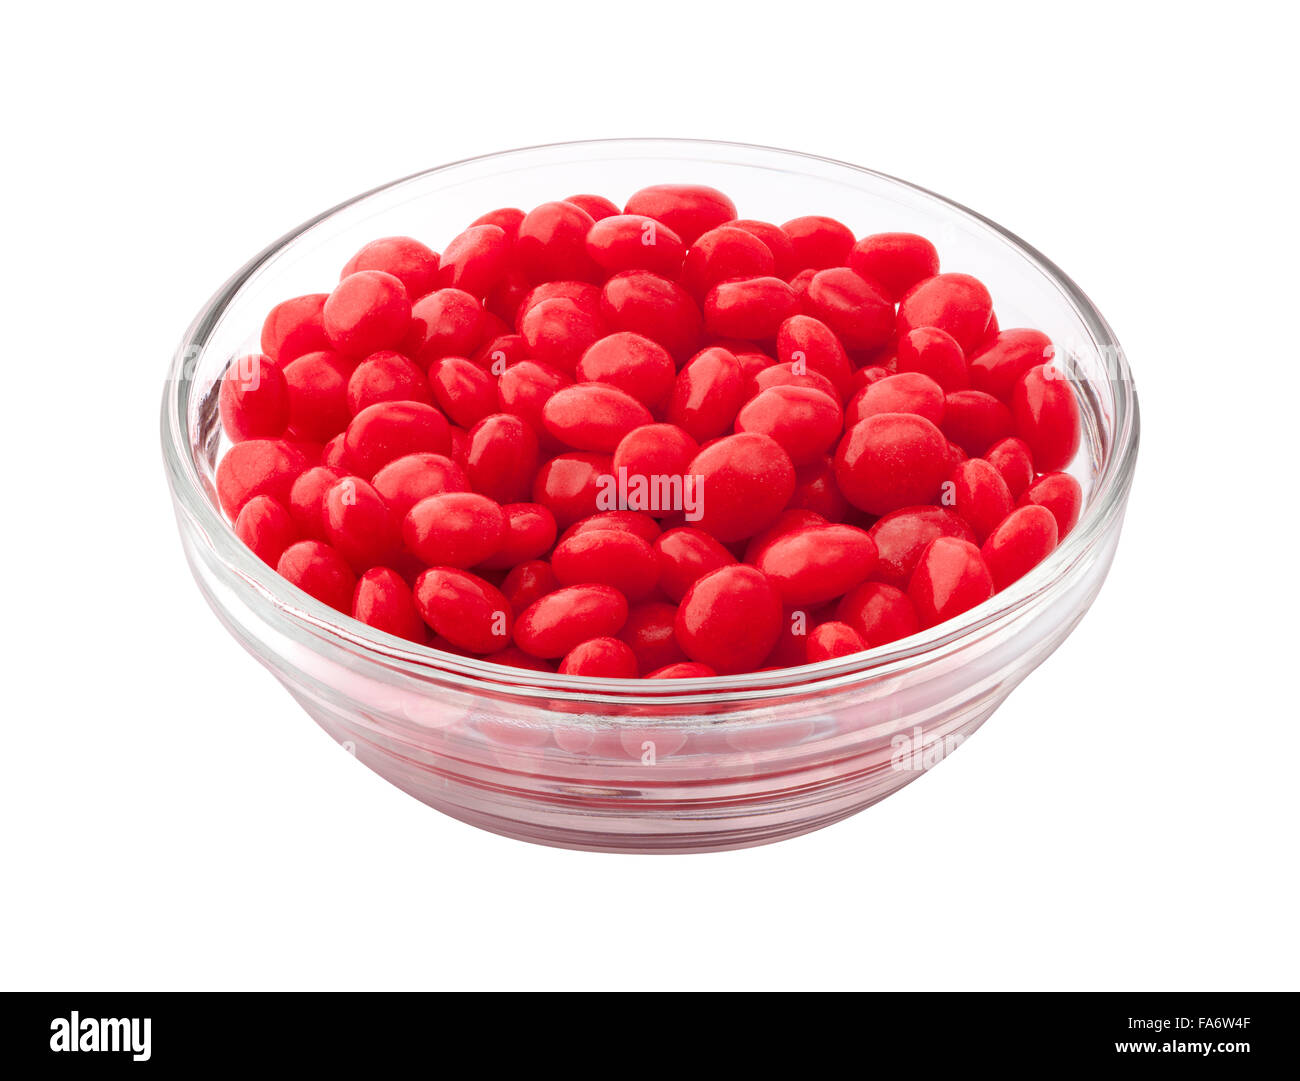 Cinnamon Candy in a Glass Bowl. Commonly used as a spicy topping at Christmas and Valentines Day. The image is a cut out, isolat Stock Photo